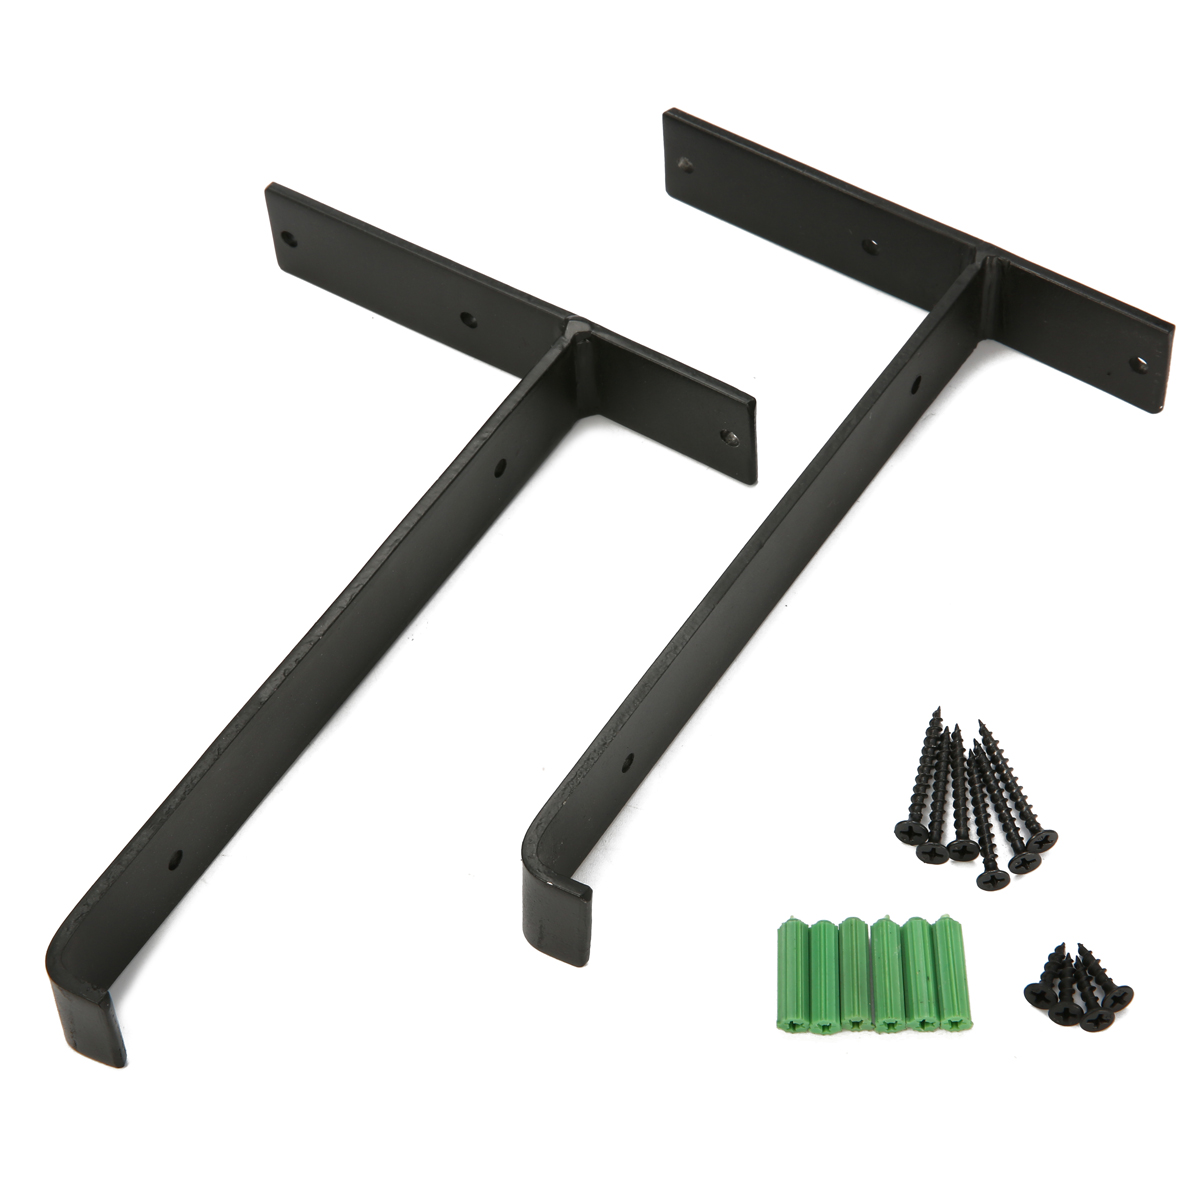 KING-DO-WAY-2Pcs-Industrial-Iron-Chunky-Solid-Wood-Shelf-Brackets-Matte-Black-Painting-for-Home-Shop-1212500-9